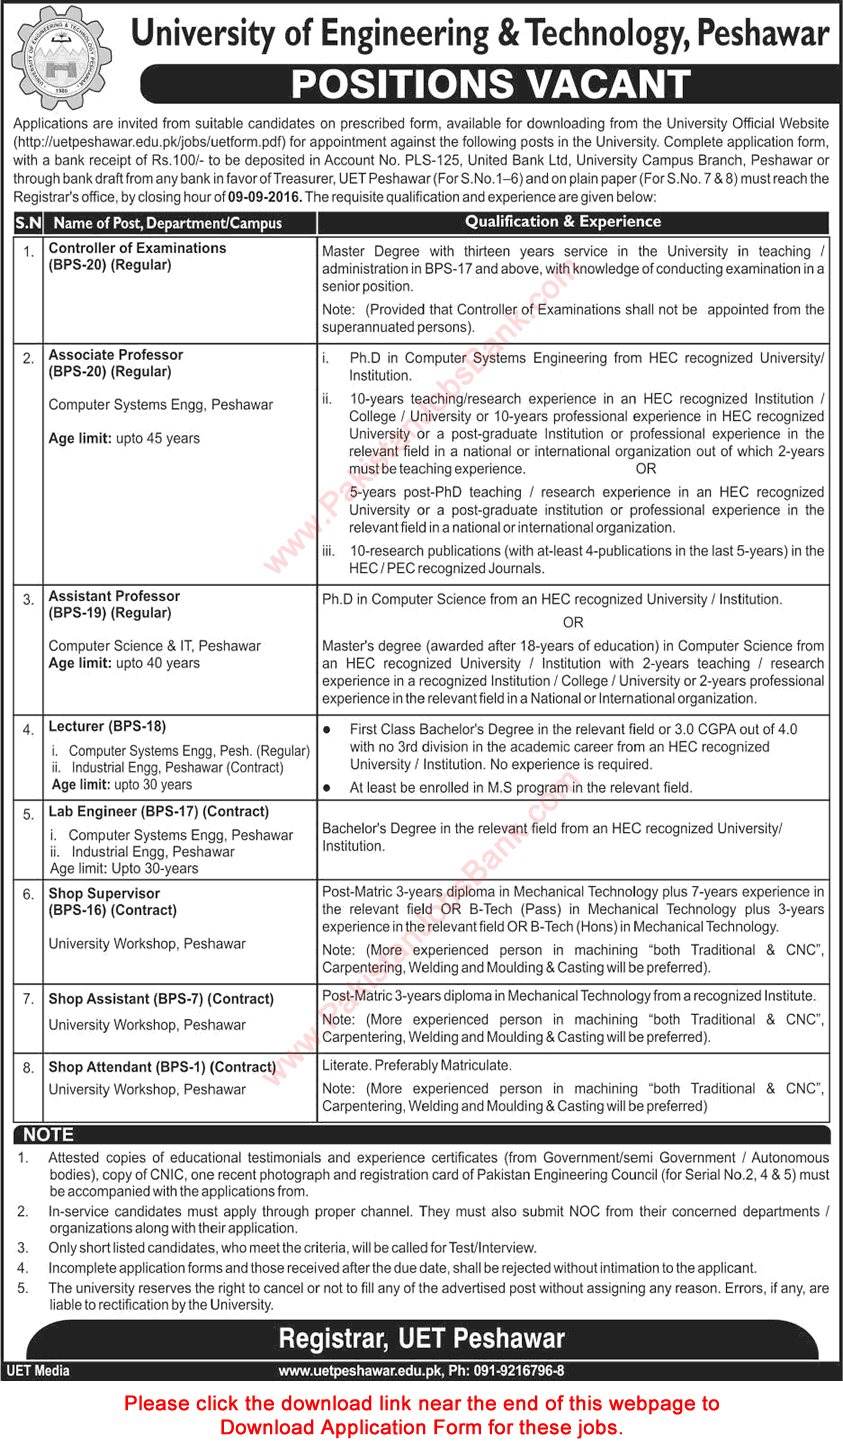 UET Peshawar Jobs August 2016 Application Form Teaching Faculty, Lab Engineers & Others Latest